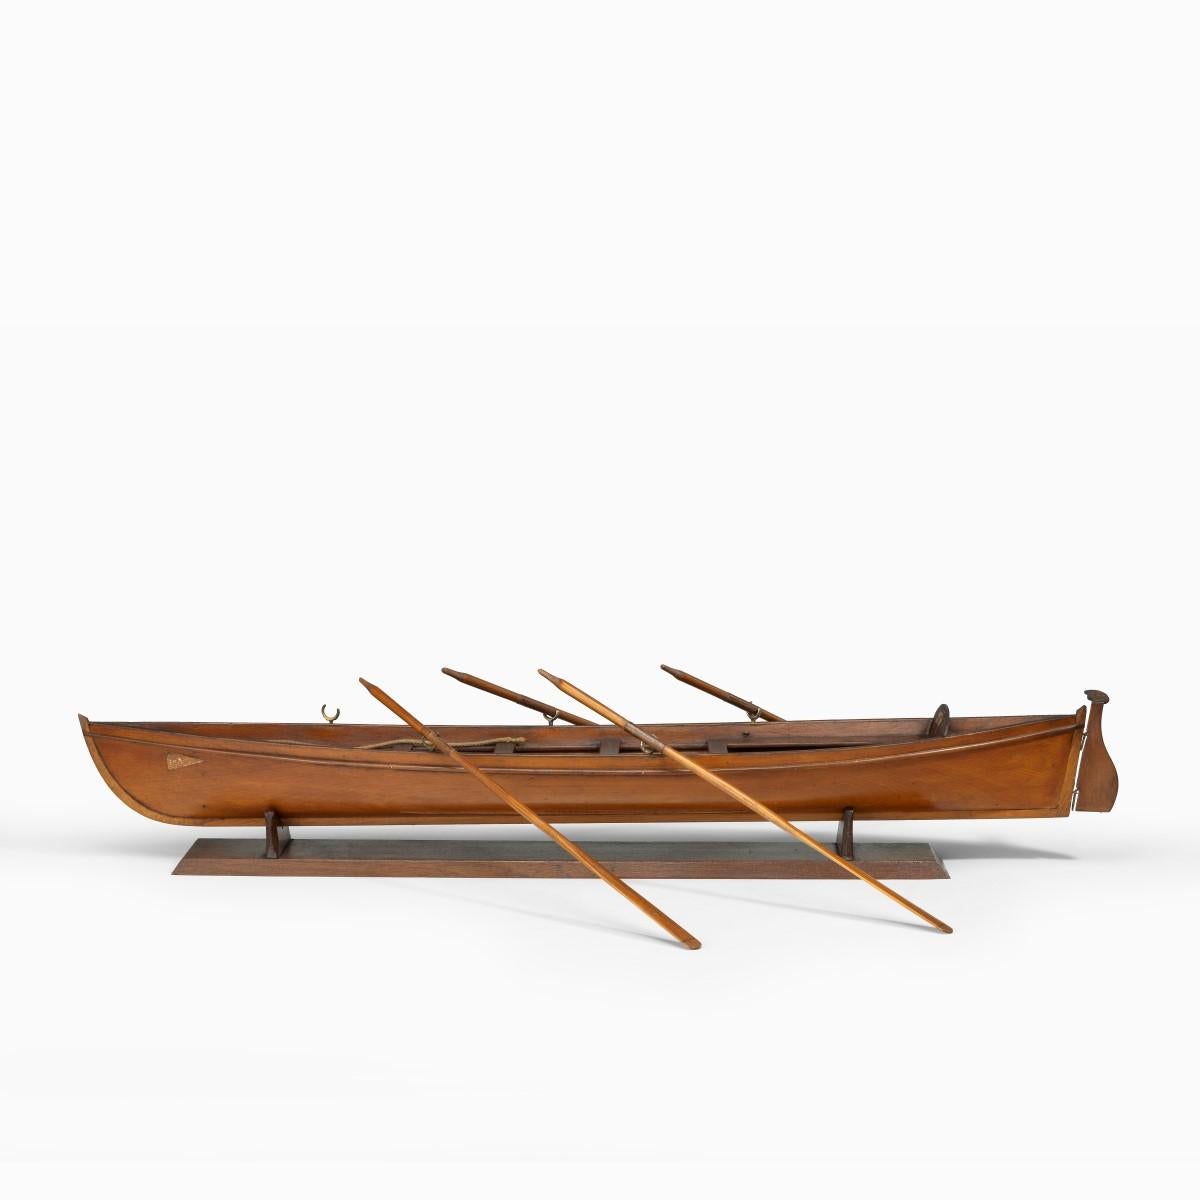 An Edwardian pine five-oar rowing skiff, retaining just four oars, but with the original mast and boat hook, a paper pennant on the back rest showing three heraldic lions, with a burgee on the bow, raised on a stand. English, circa 1900.